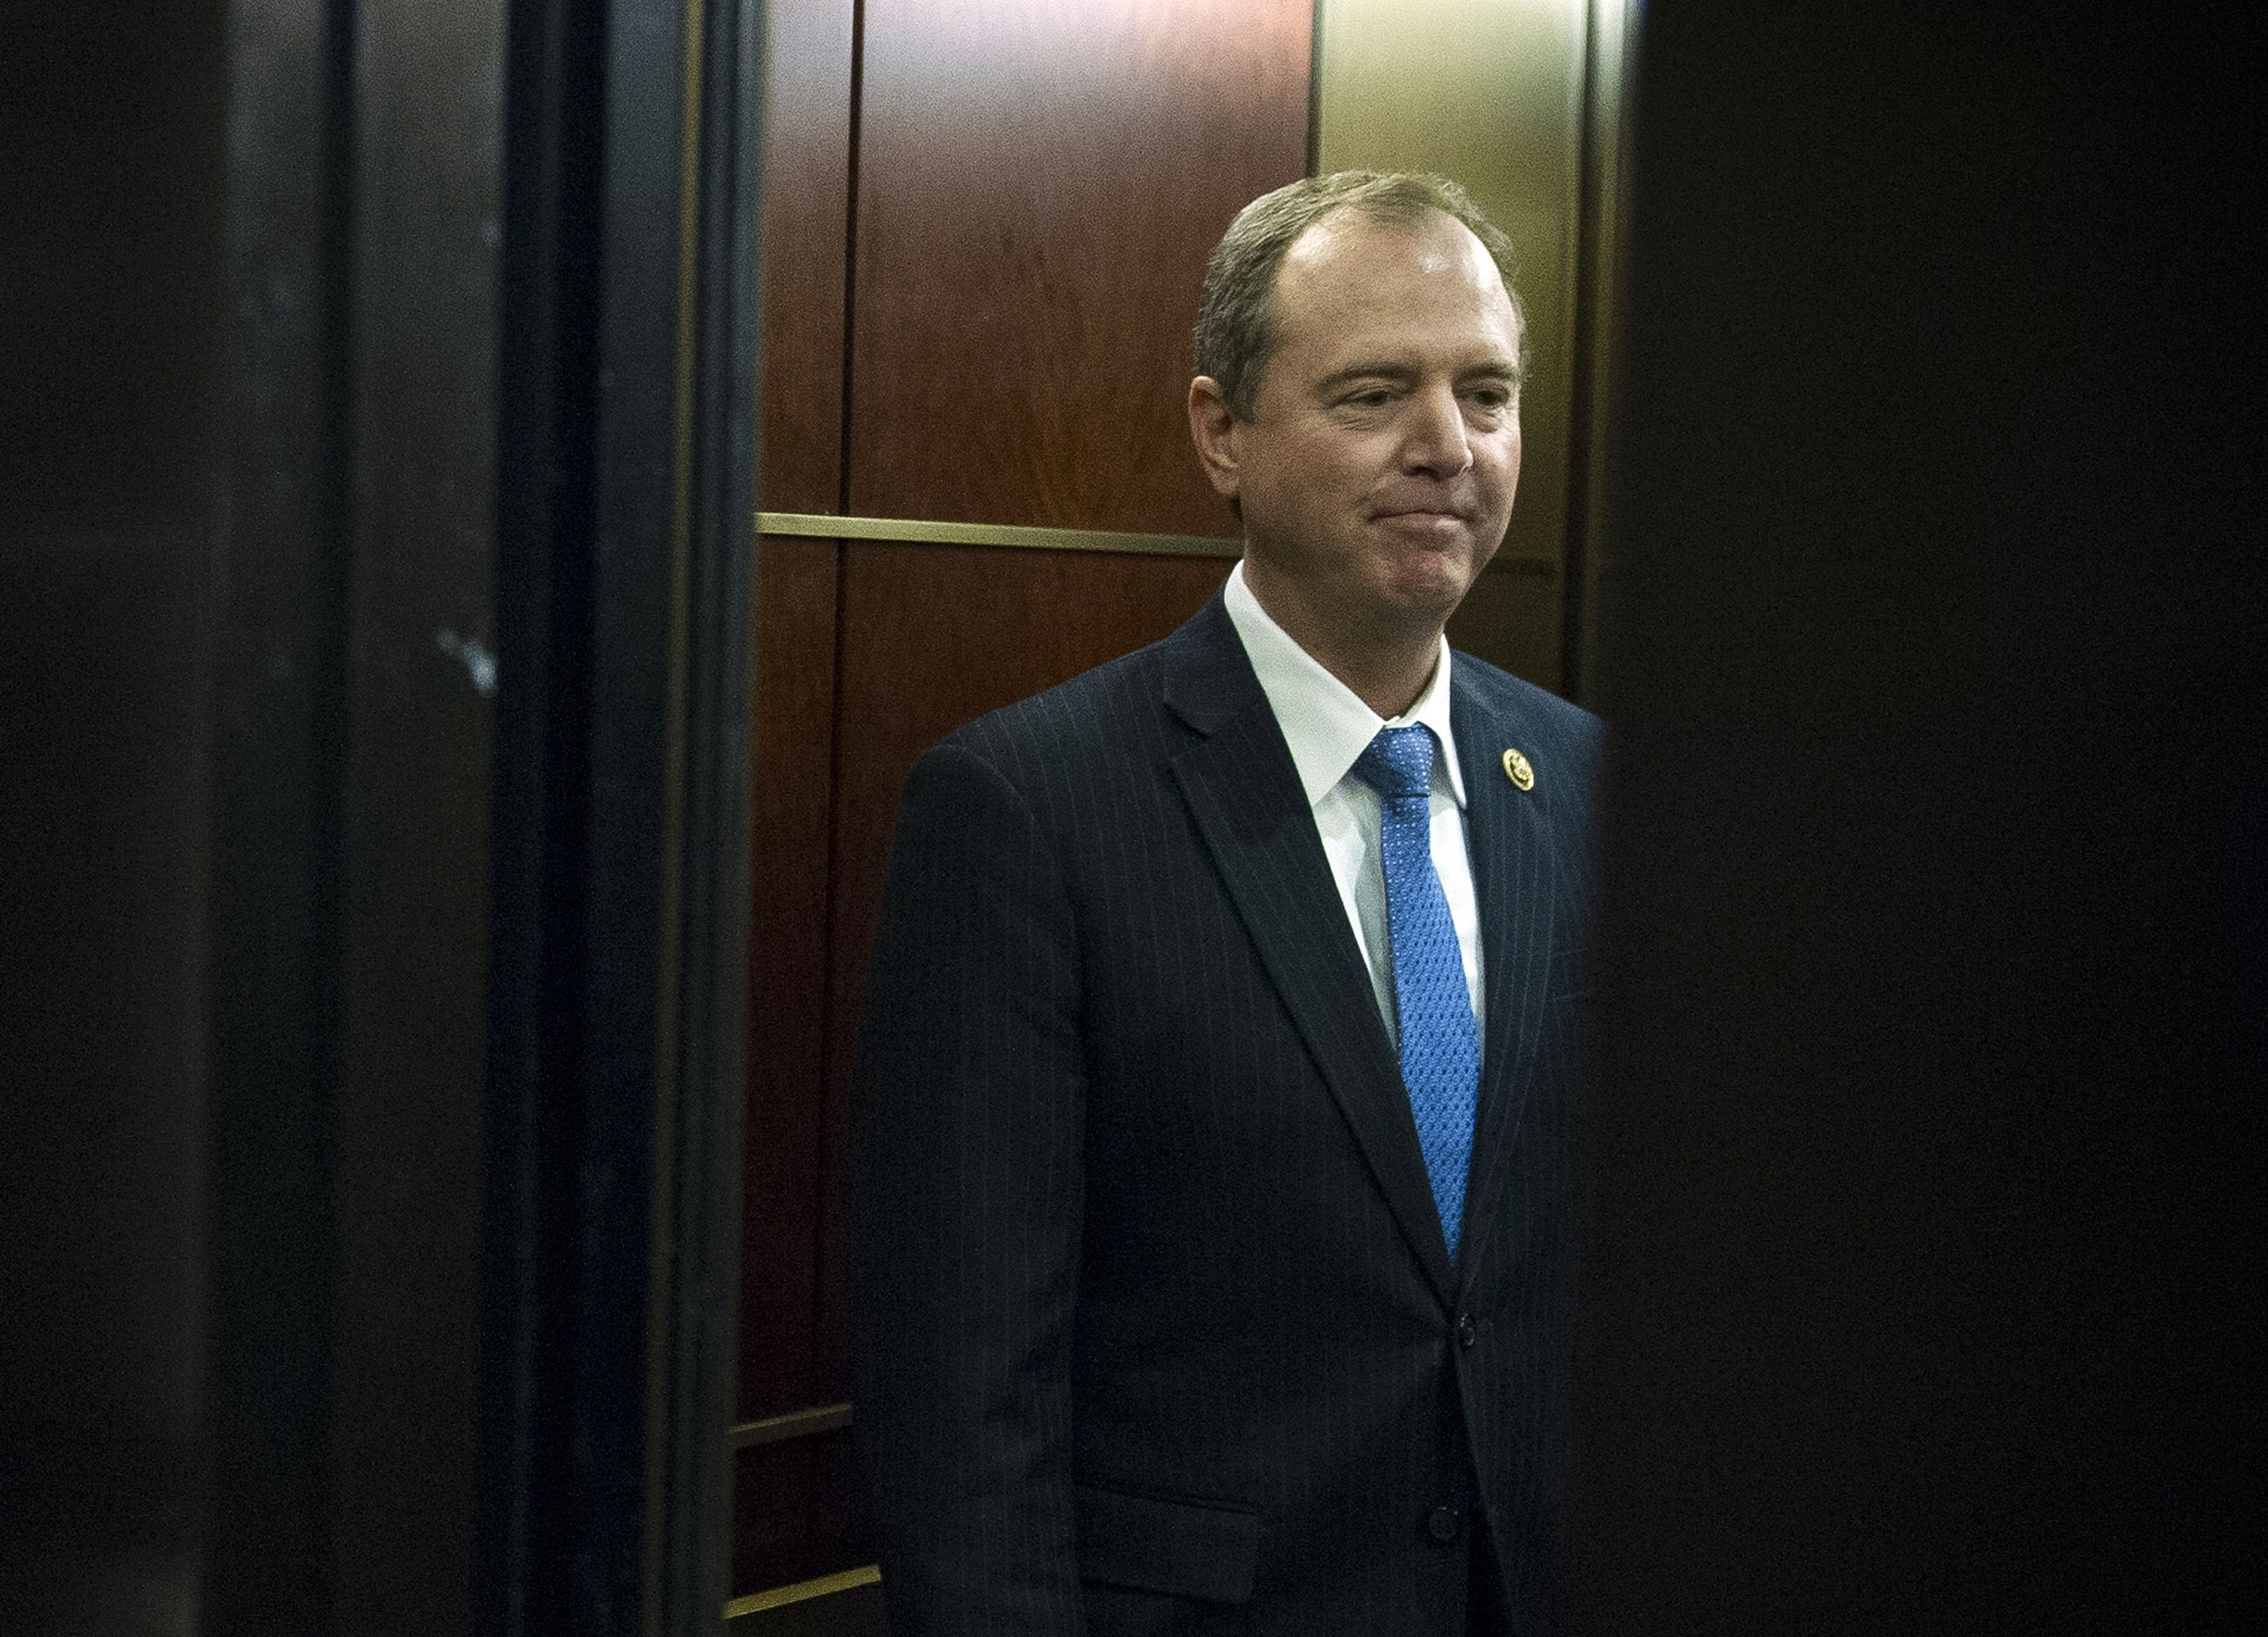 Rep. Adam Schiff, D-Calif., ranking member on the House Intelligence Committee, waits for elevator doors to close during a break in the committee's questioning of White House communications director Hope Hicks as part of its ongoing investigation into meddling in the U.S. elections by Russia, at the Capitol in Washington (Cliff Owen—AP/Shutterstock)